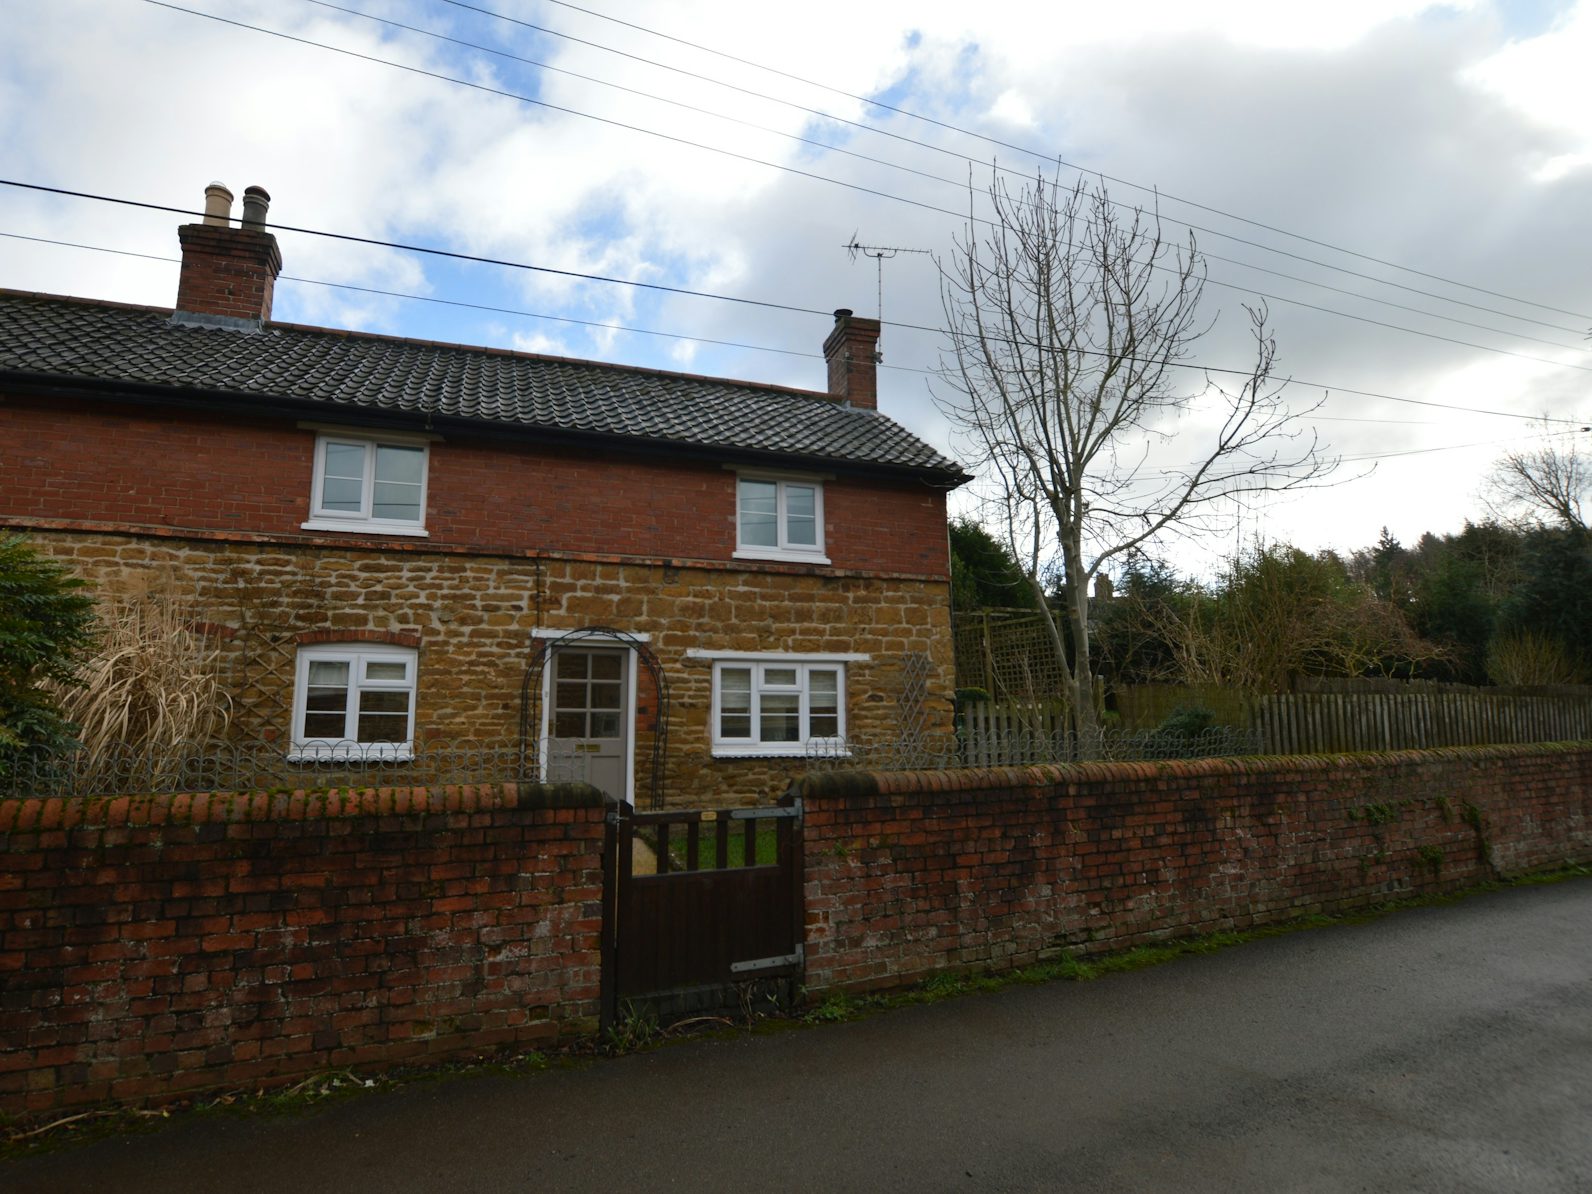 Cottage to rent on Main Street Knipton, NG32